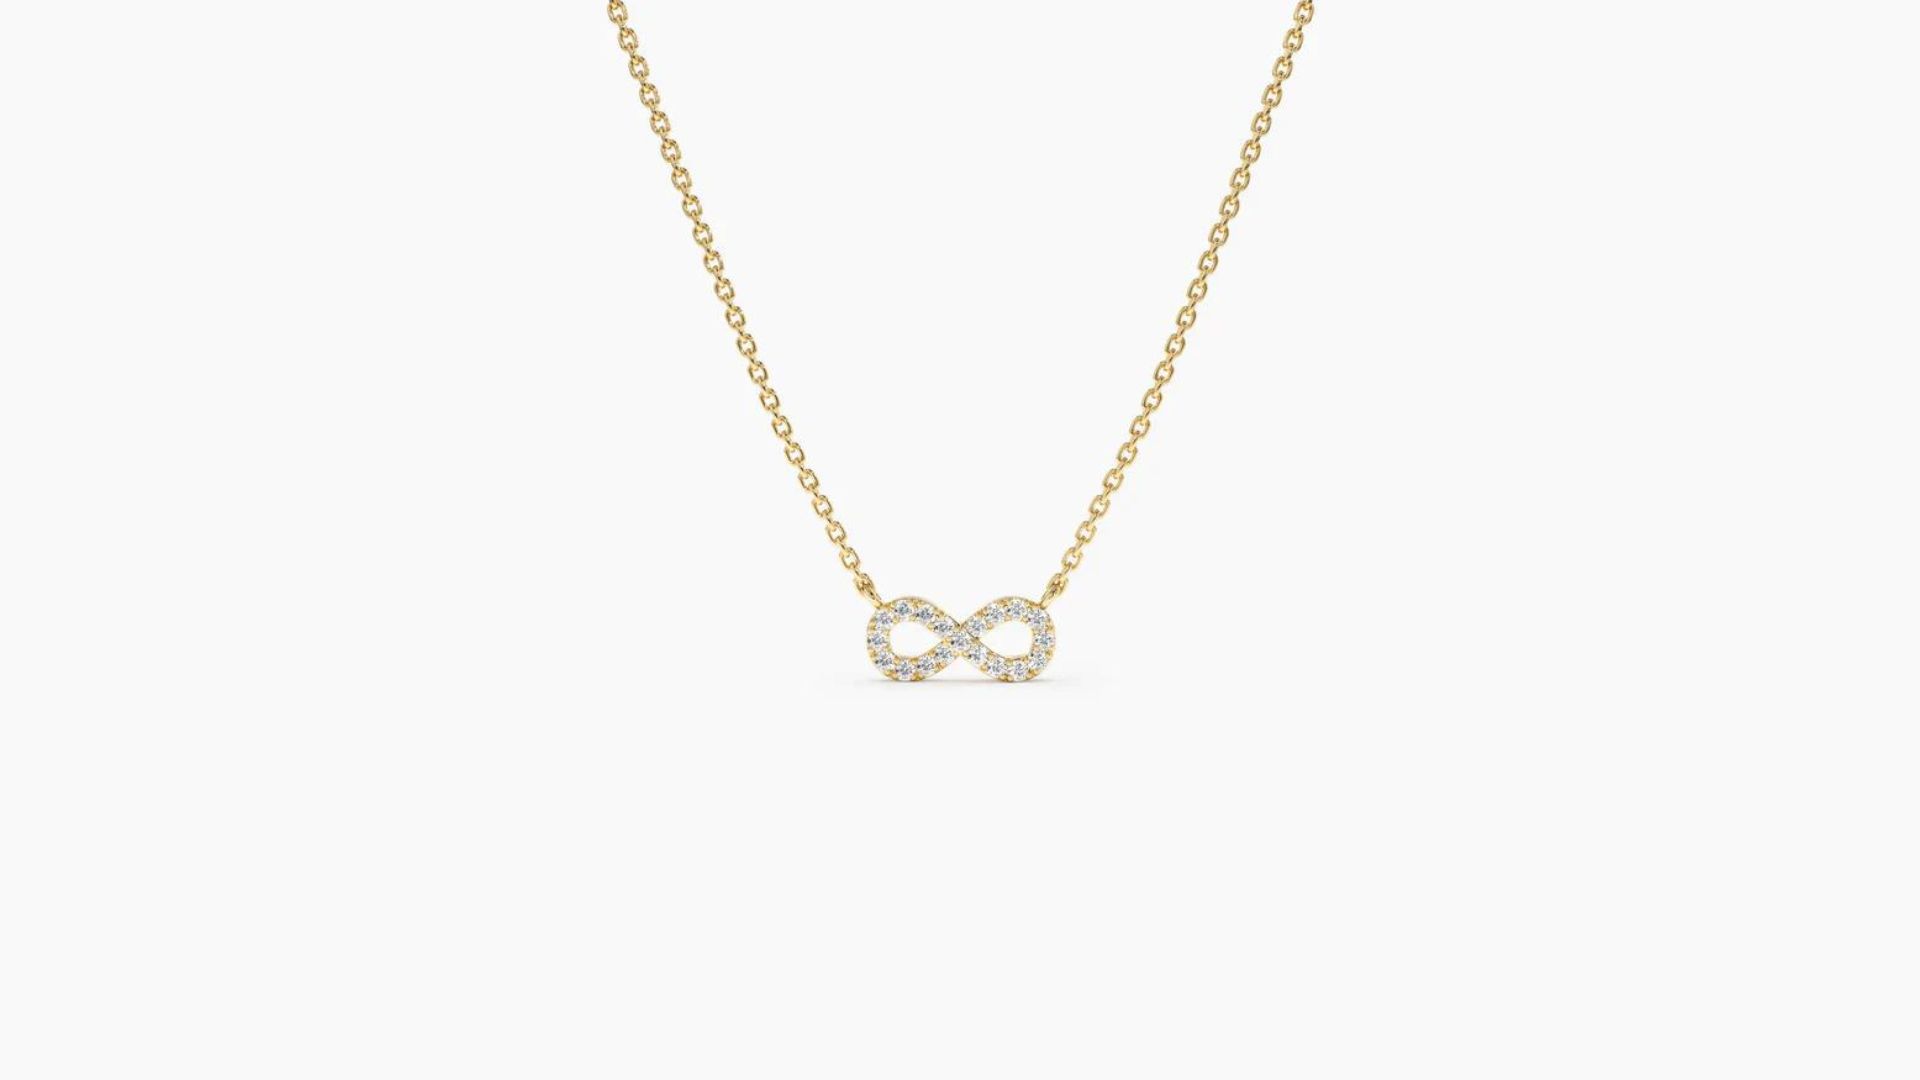 Gold Jewelry With Infinity Symbol - History, Care, And Styling Tips